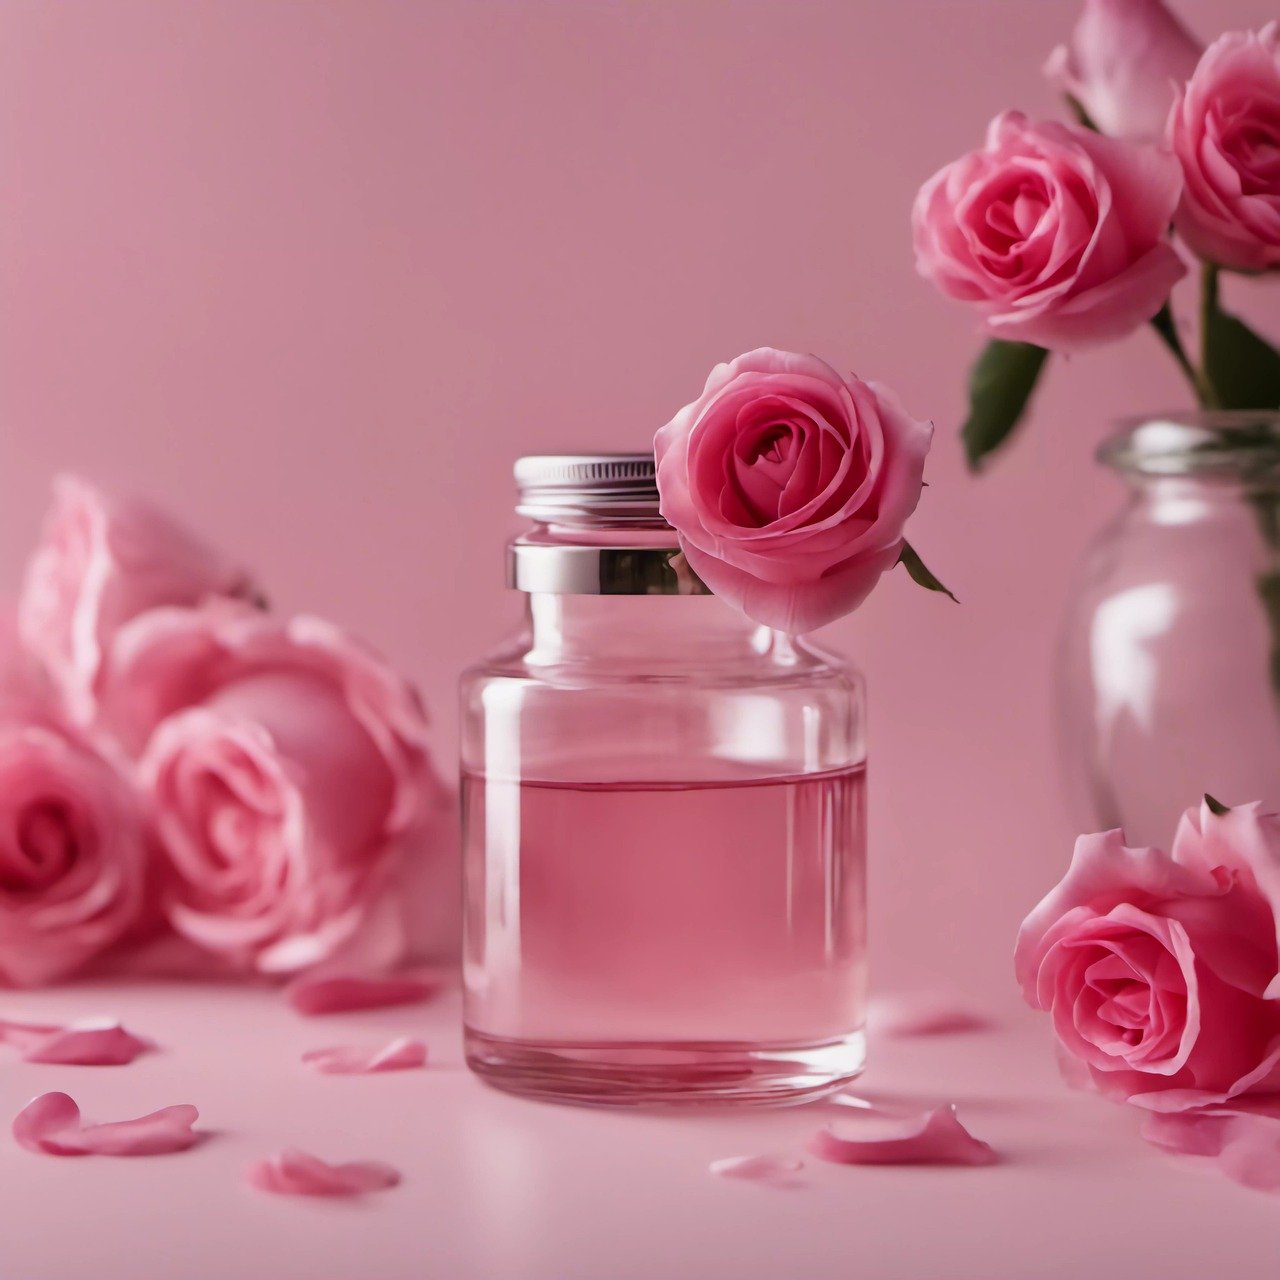 Exploring Natural Extracts and Synthetics in Fragrance